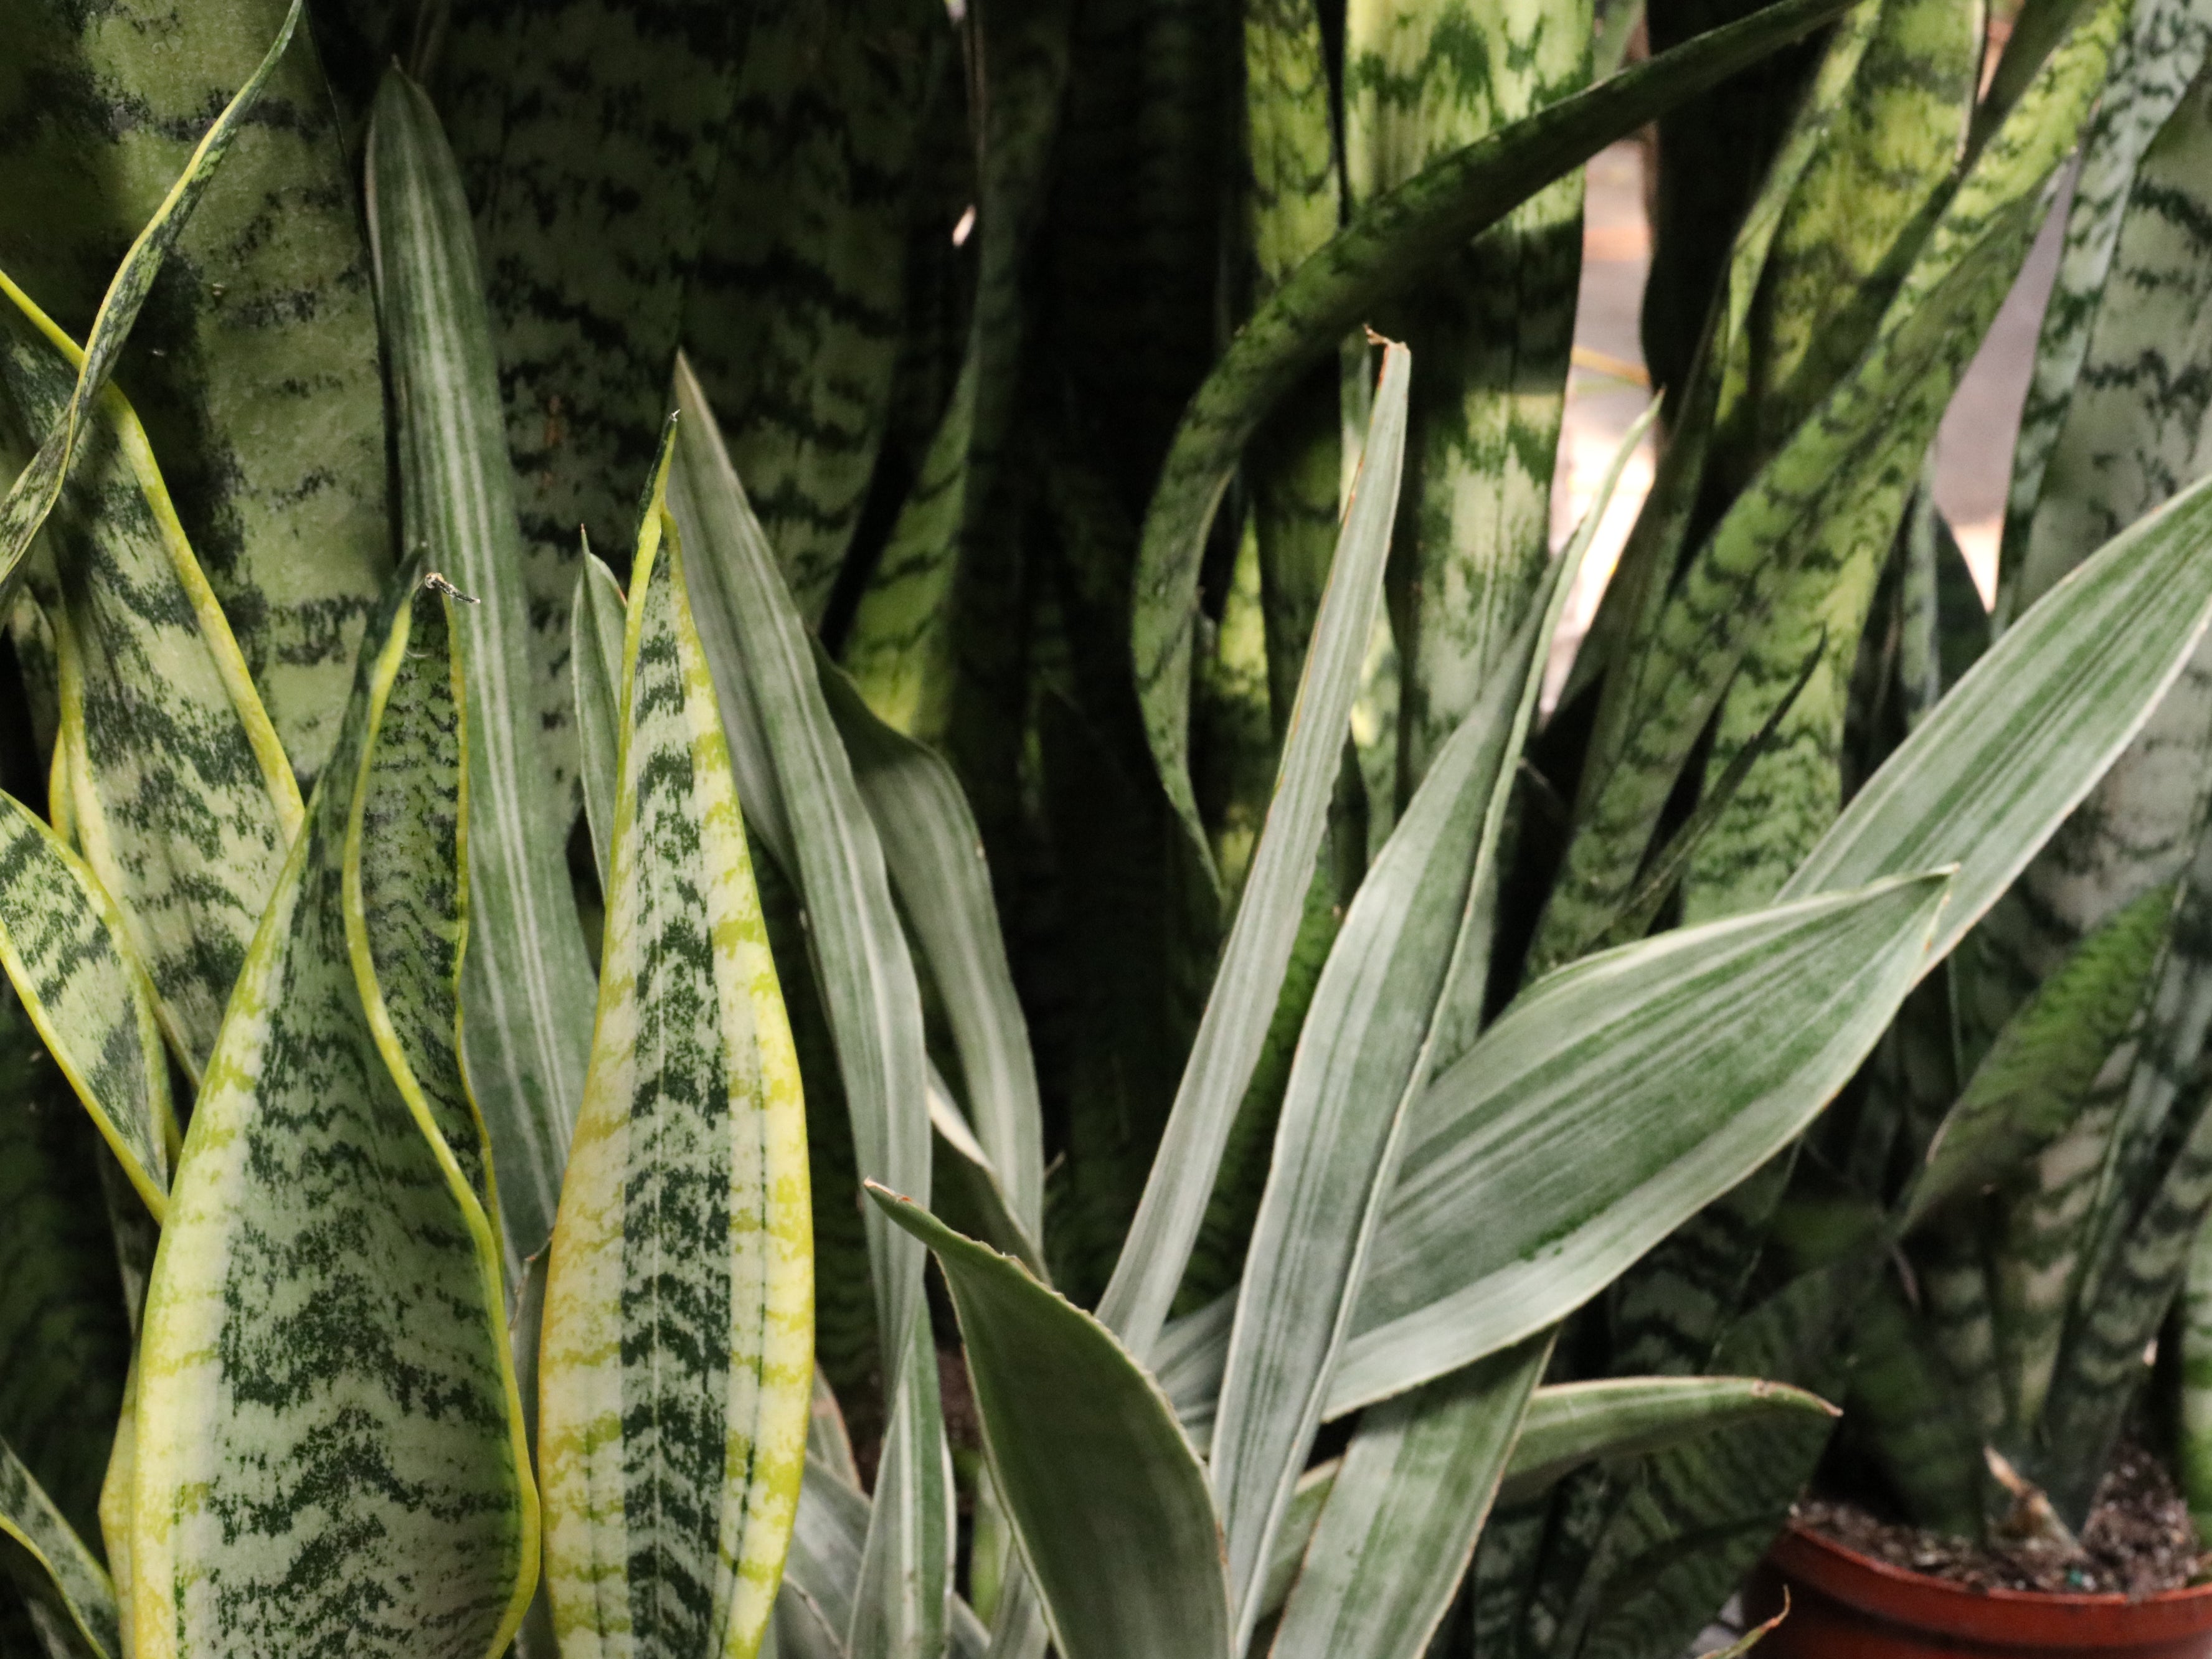 Immortal Snake Plants 101: Everything You Need To Know